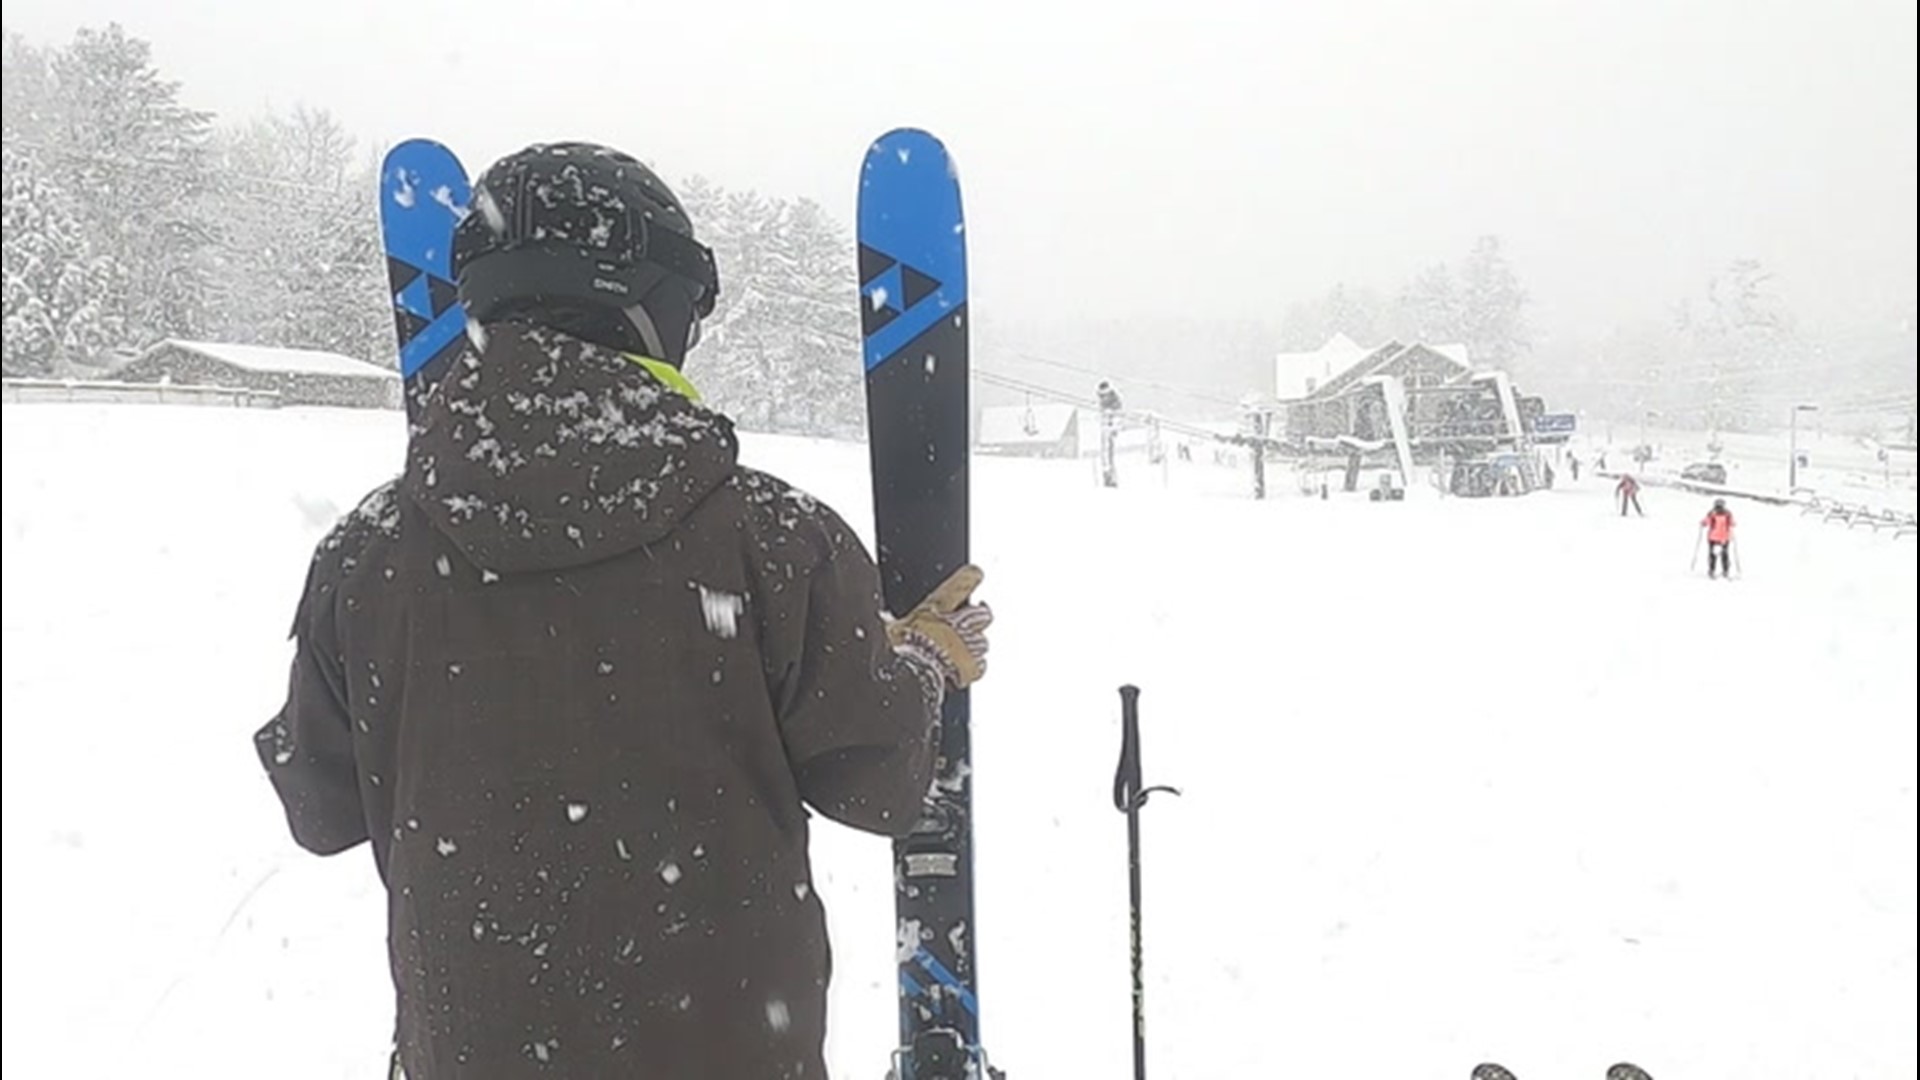 Many ski resorts from New York, New Hampshire, and Vermont are faring well from the fresh snowfall provided by a winter storm on Jan. 16.